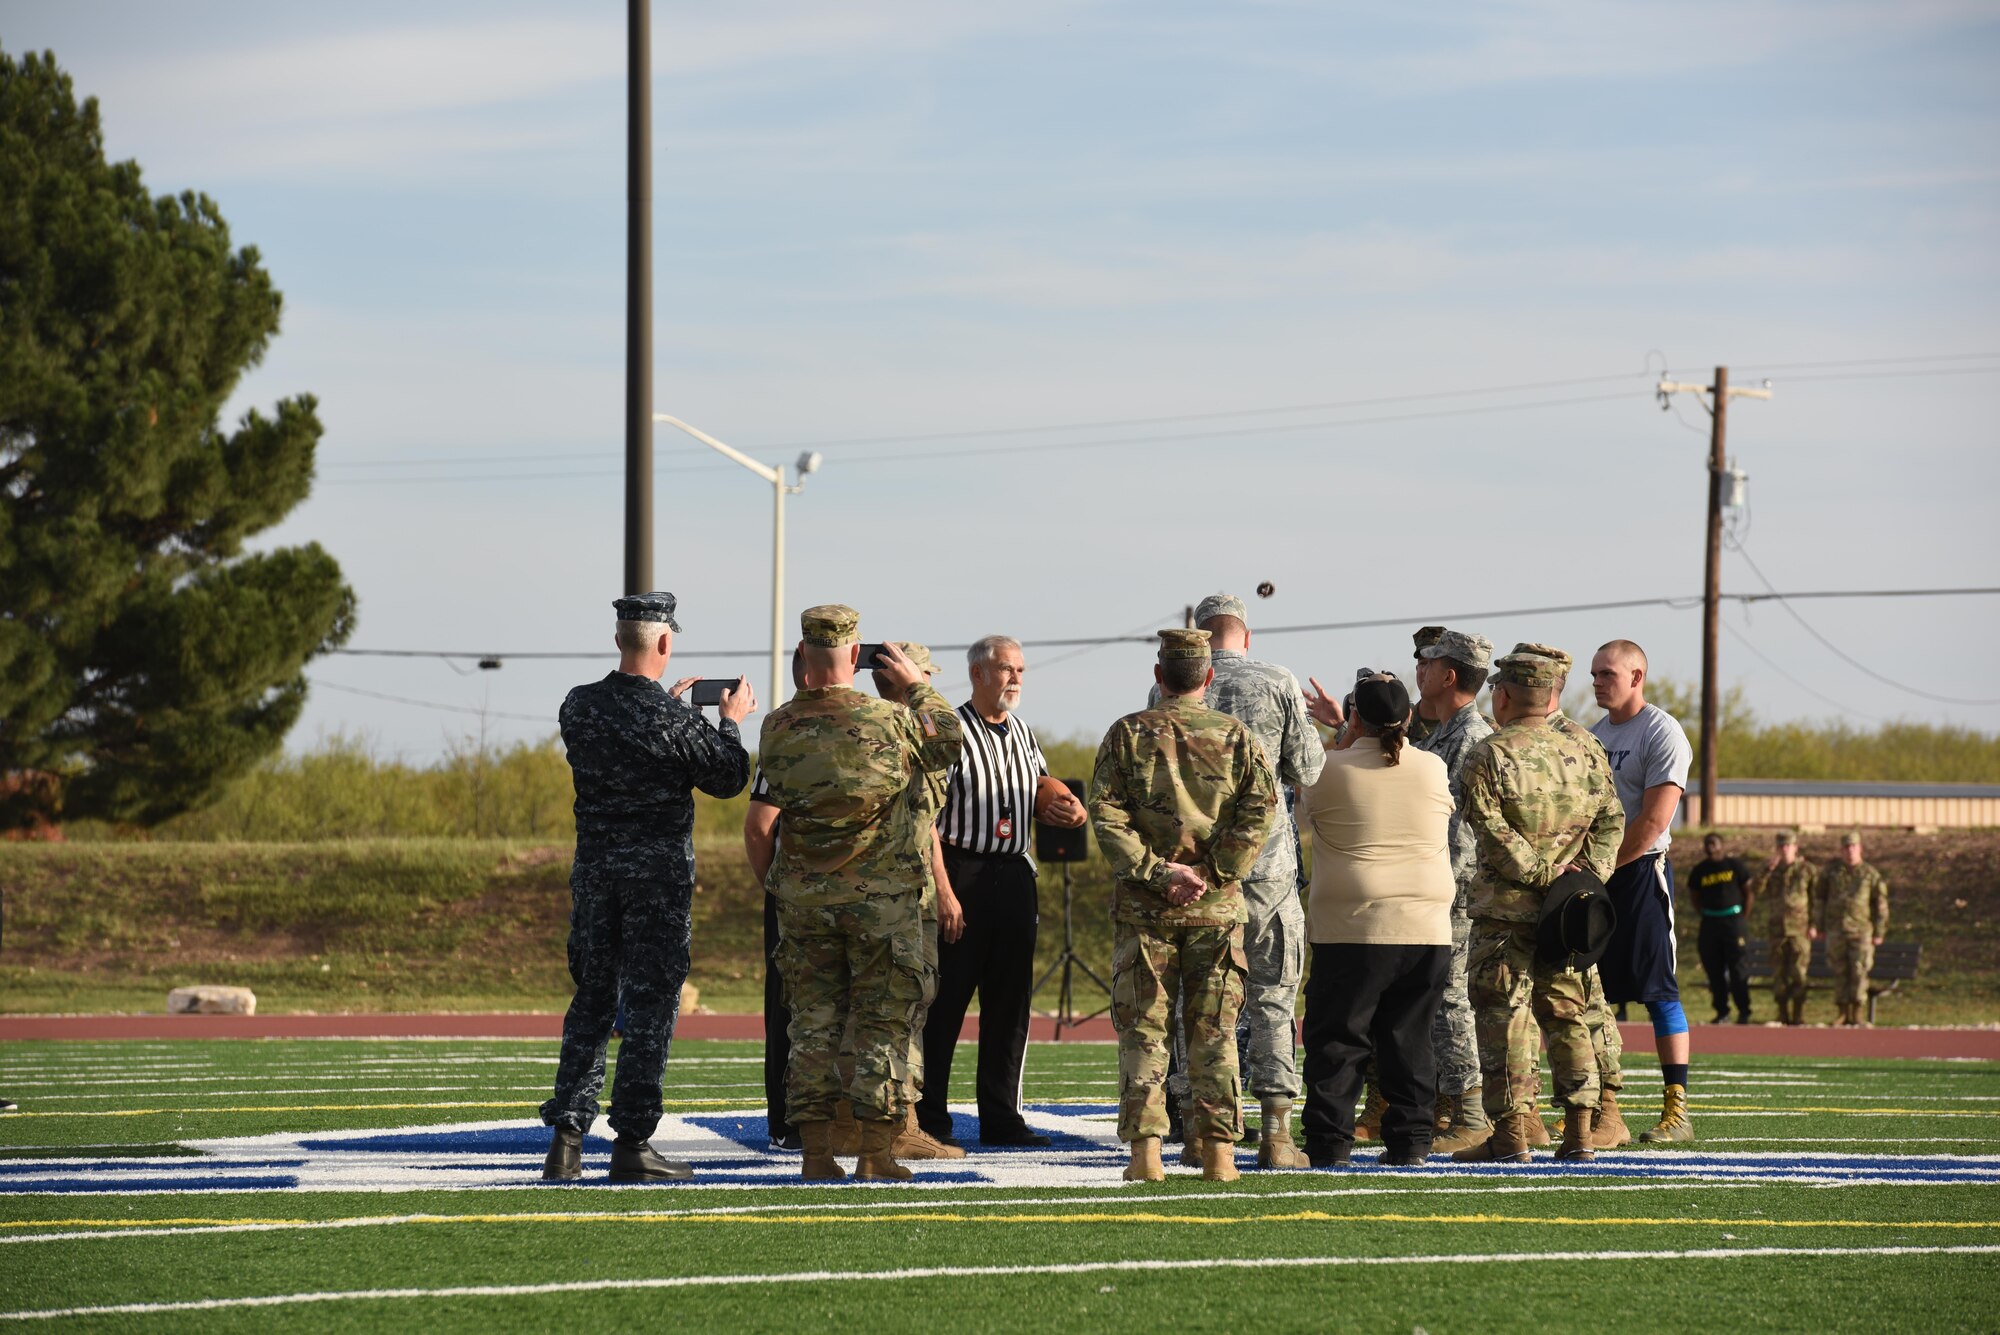 U.S. Air Force Col. Ricky Mills, 17th Training Wing commander, flips the coin determining who will go first during the Army-Navy game at the Mathis Fitness Center field Dec. 1. As honored guest, along with tossing the coin, Mills gave opening remarks before the game on the translation of comradery from on the playing field to on the battle field. (U.S. Air Force photo by Airman 1st Class Zachary Chapman/Released)